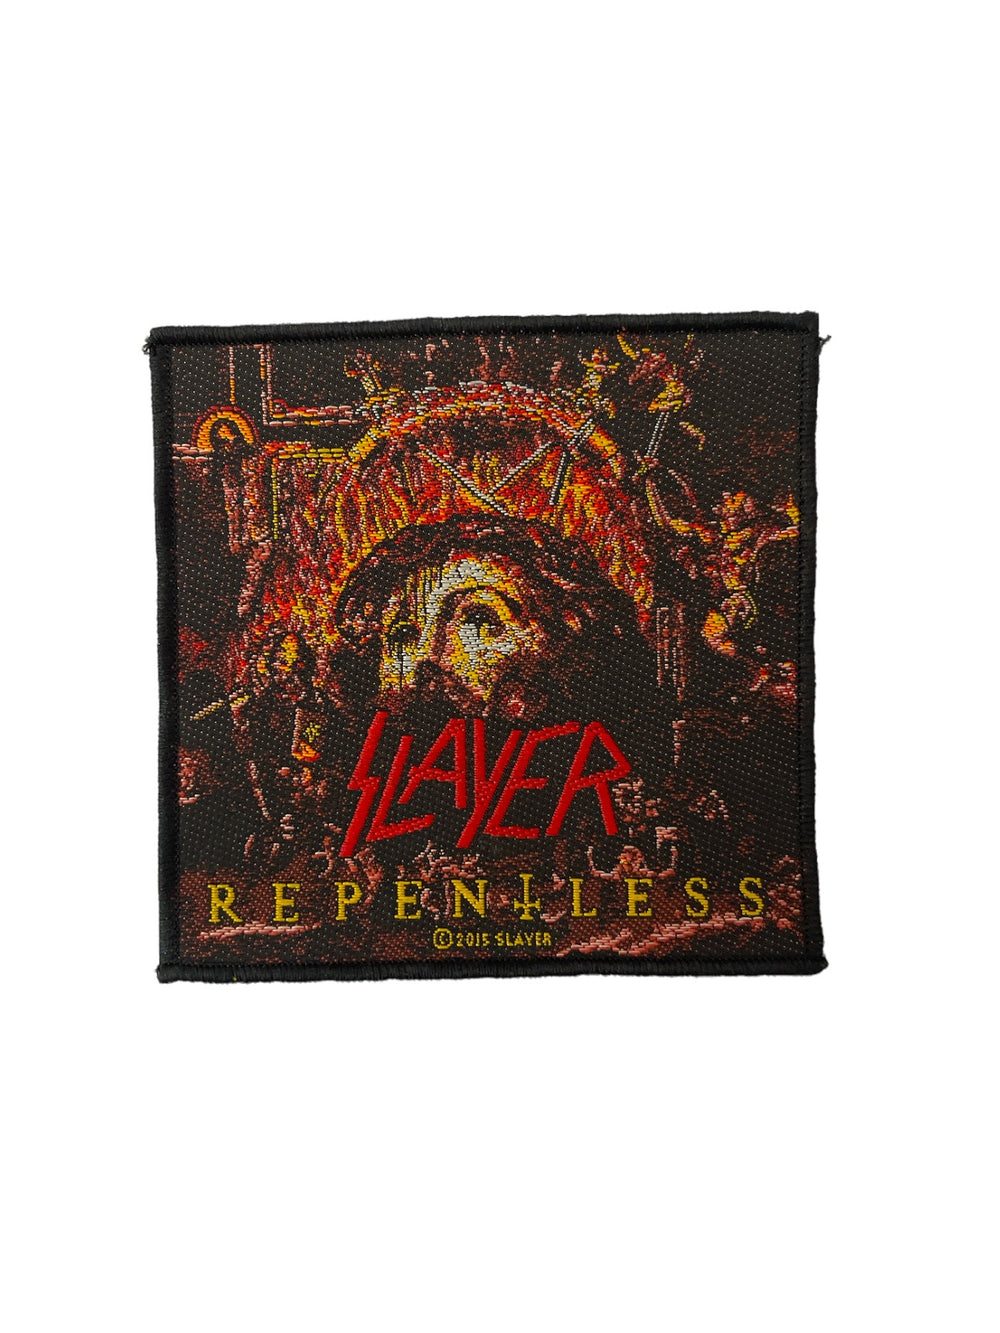 Slayer Repentless Official Sew On Woven Patch Brand New